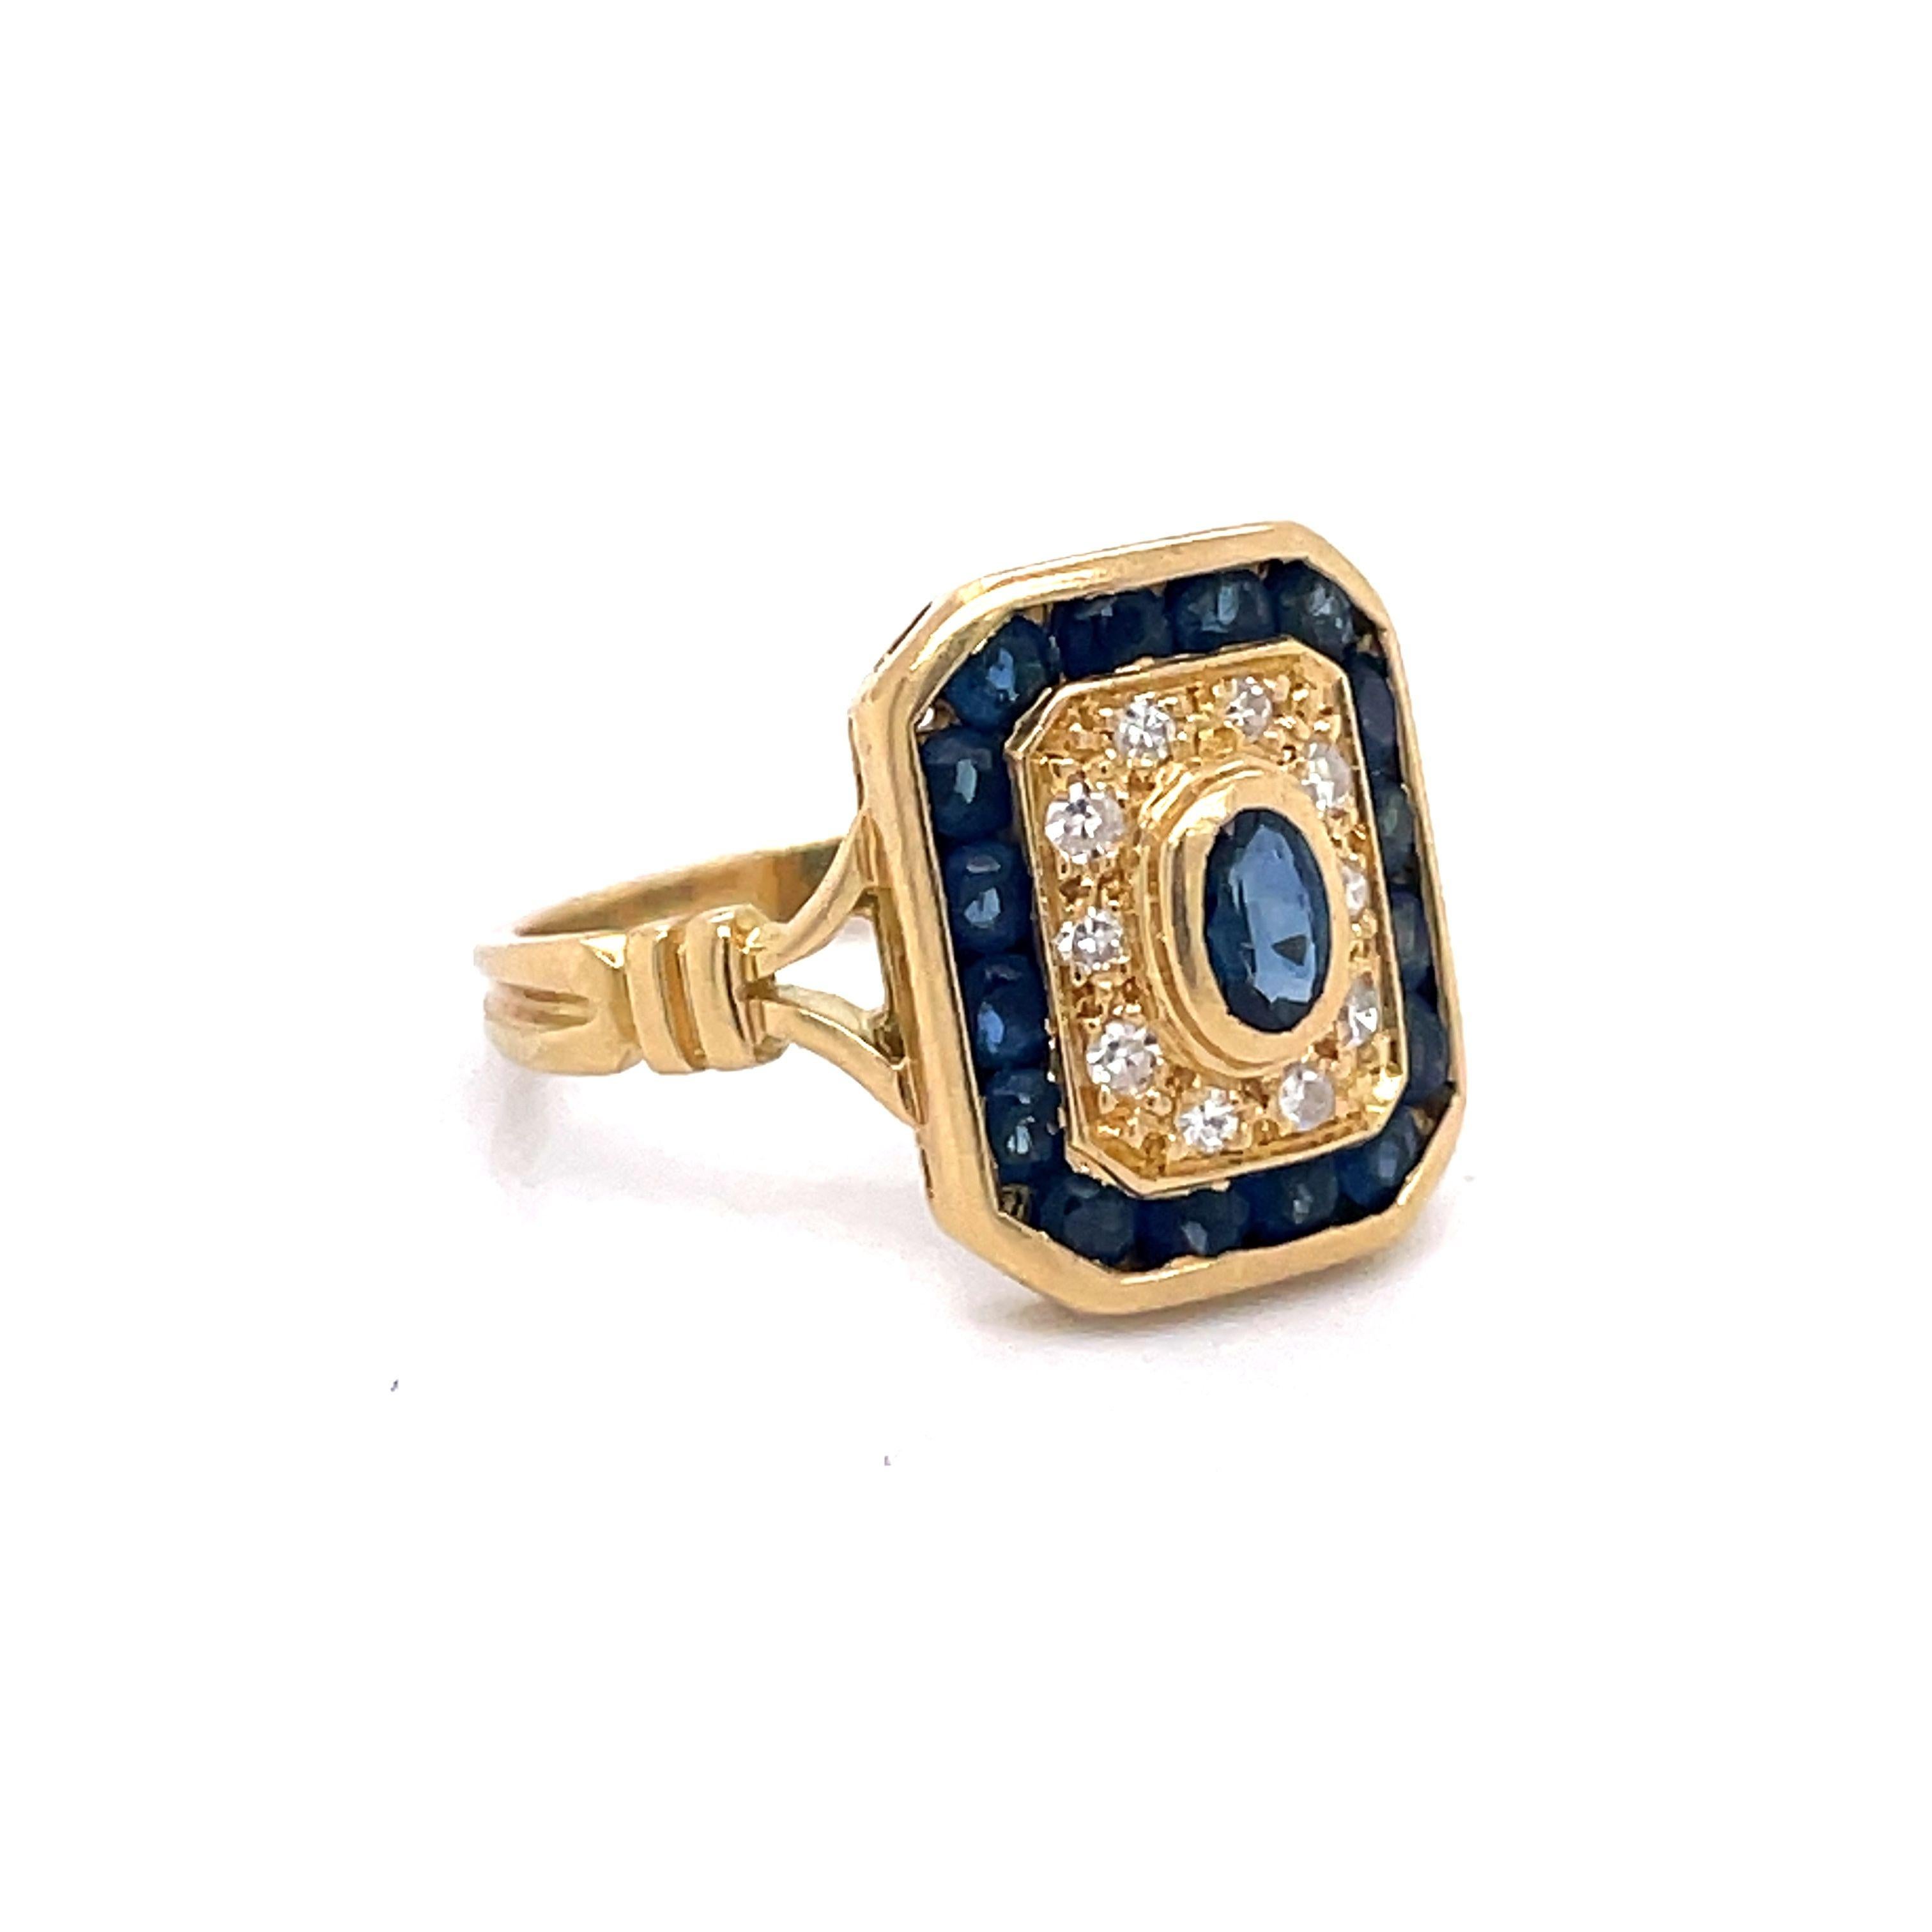 Vintage Ring 0.15 Ct Oval Shape Natural Sapphire, Solid 14k Yellow Gold, Estate Ring ,
 
~~ S e t t i n g ~~
Solid 14k Yellow Gold
4.86 grams
Ring Size 6.5 US
 
~~ Stones ~~
Main Stone:
Oval Shape Natural Sapphire In Weight Of 0.15 Ct